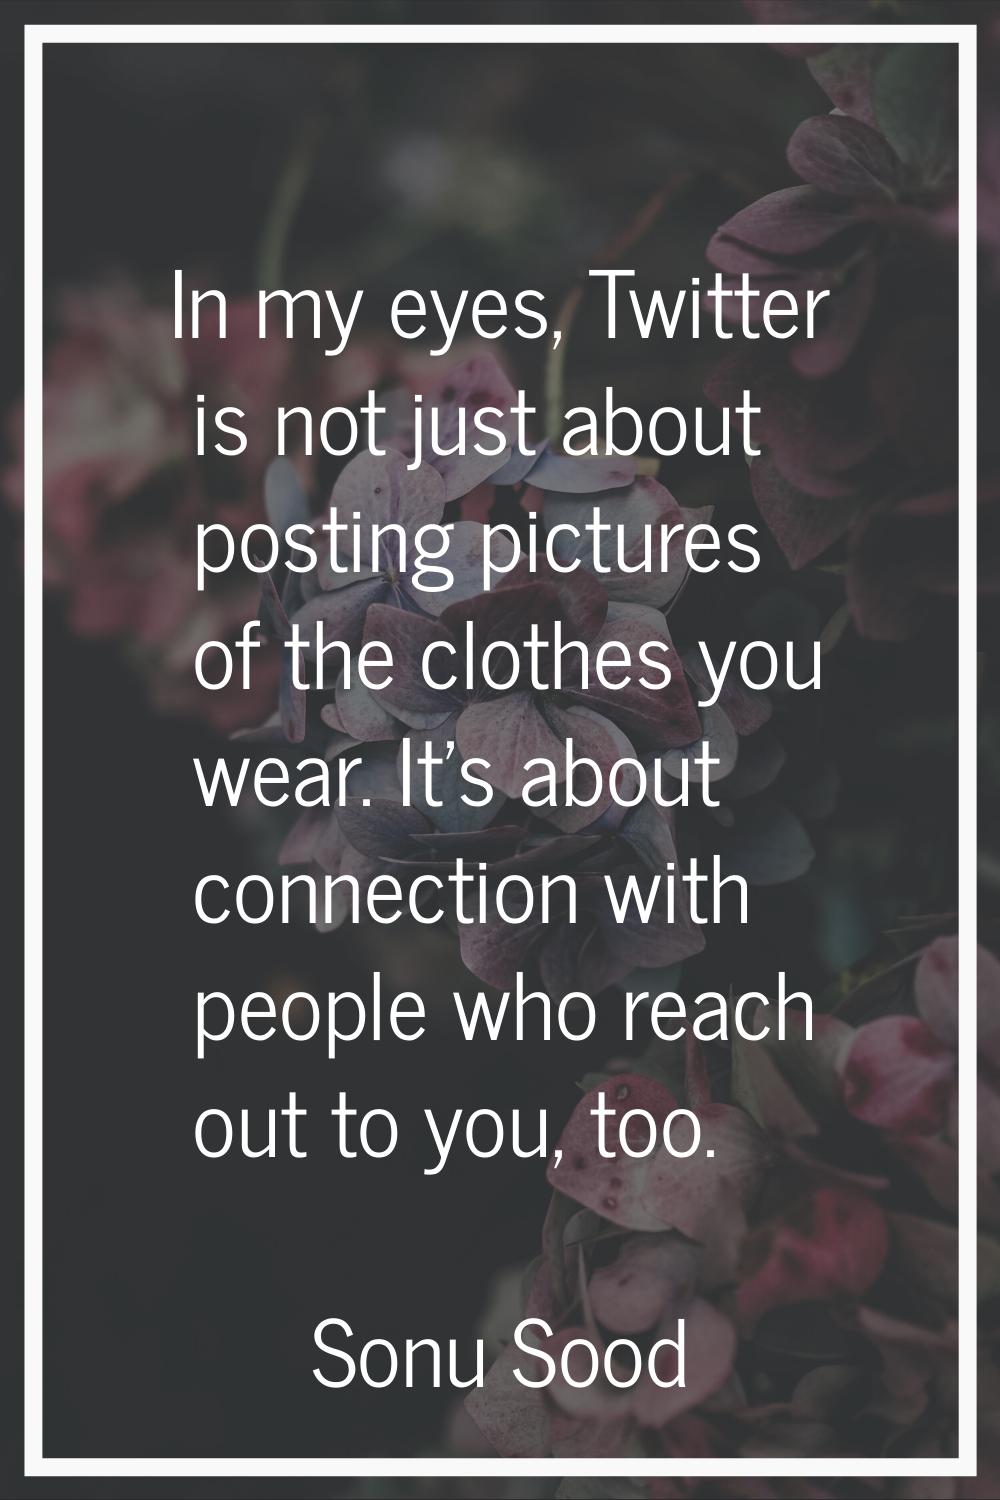 In my eyes, Twitter is not just about posting pictures of the clothes you wear. It's about connecti